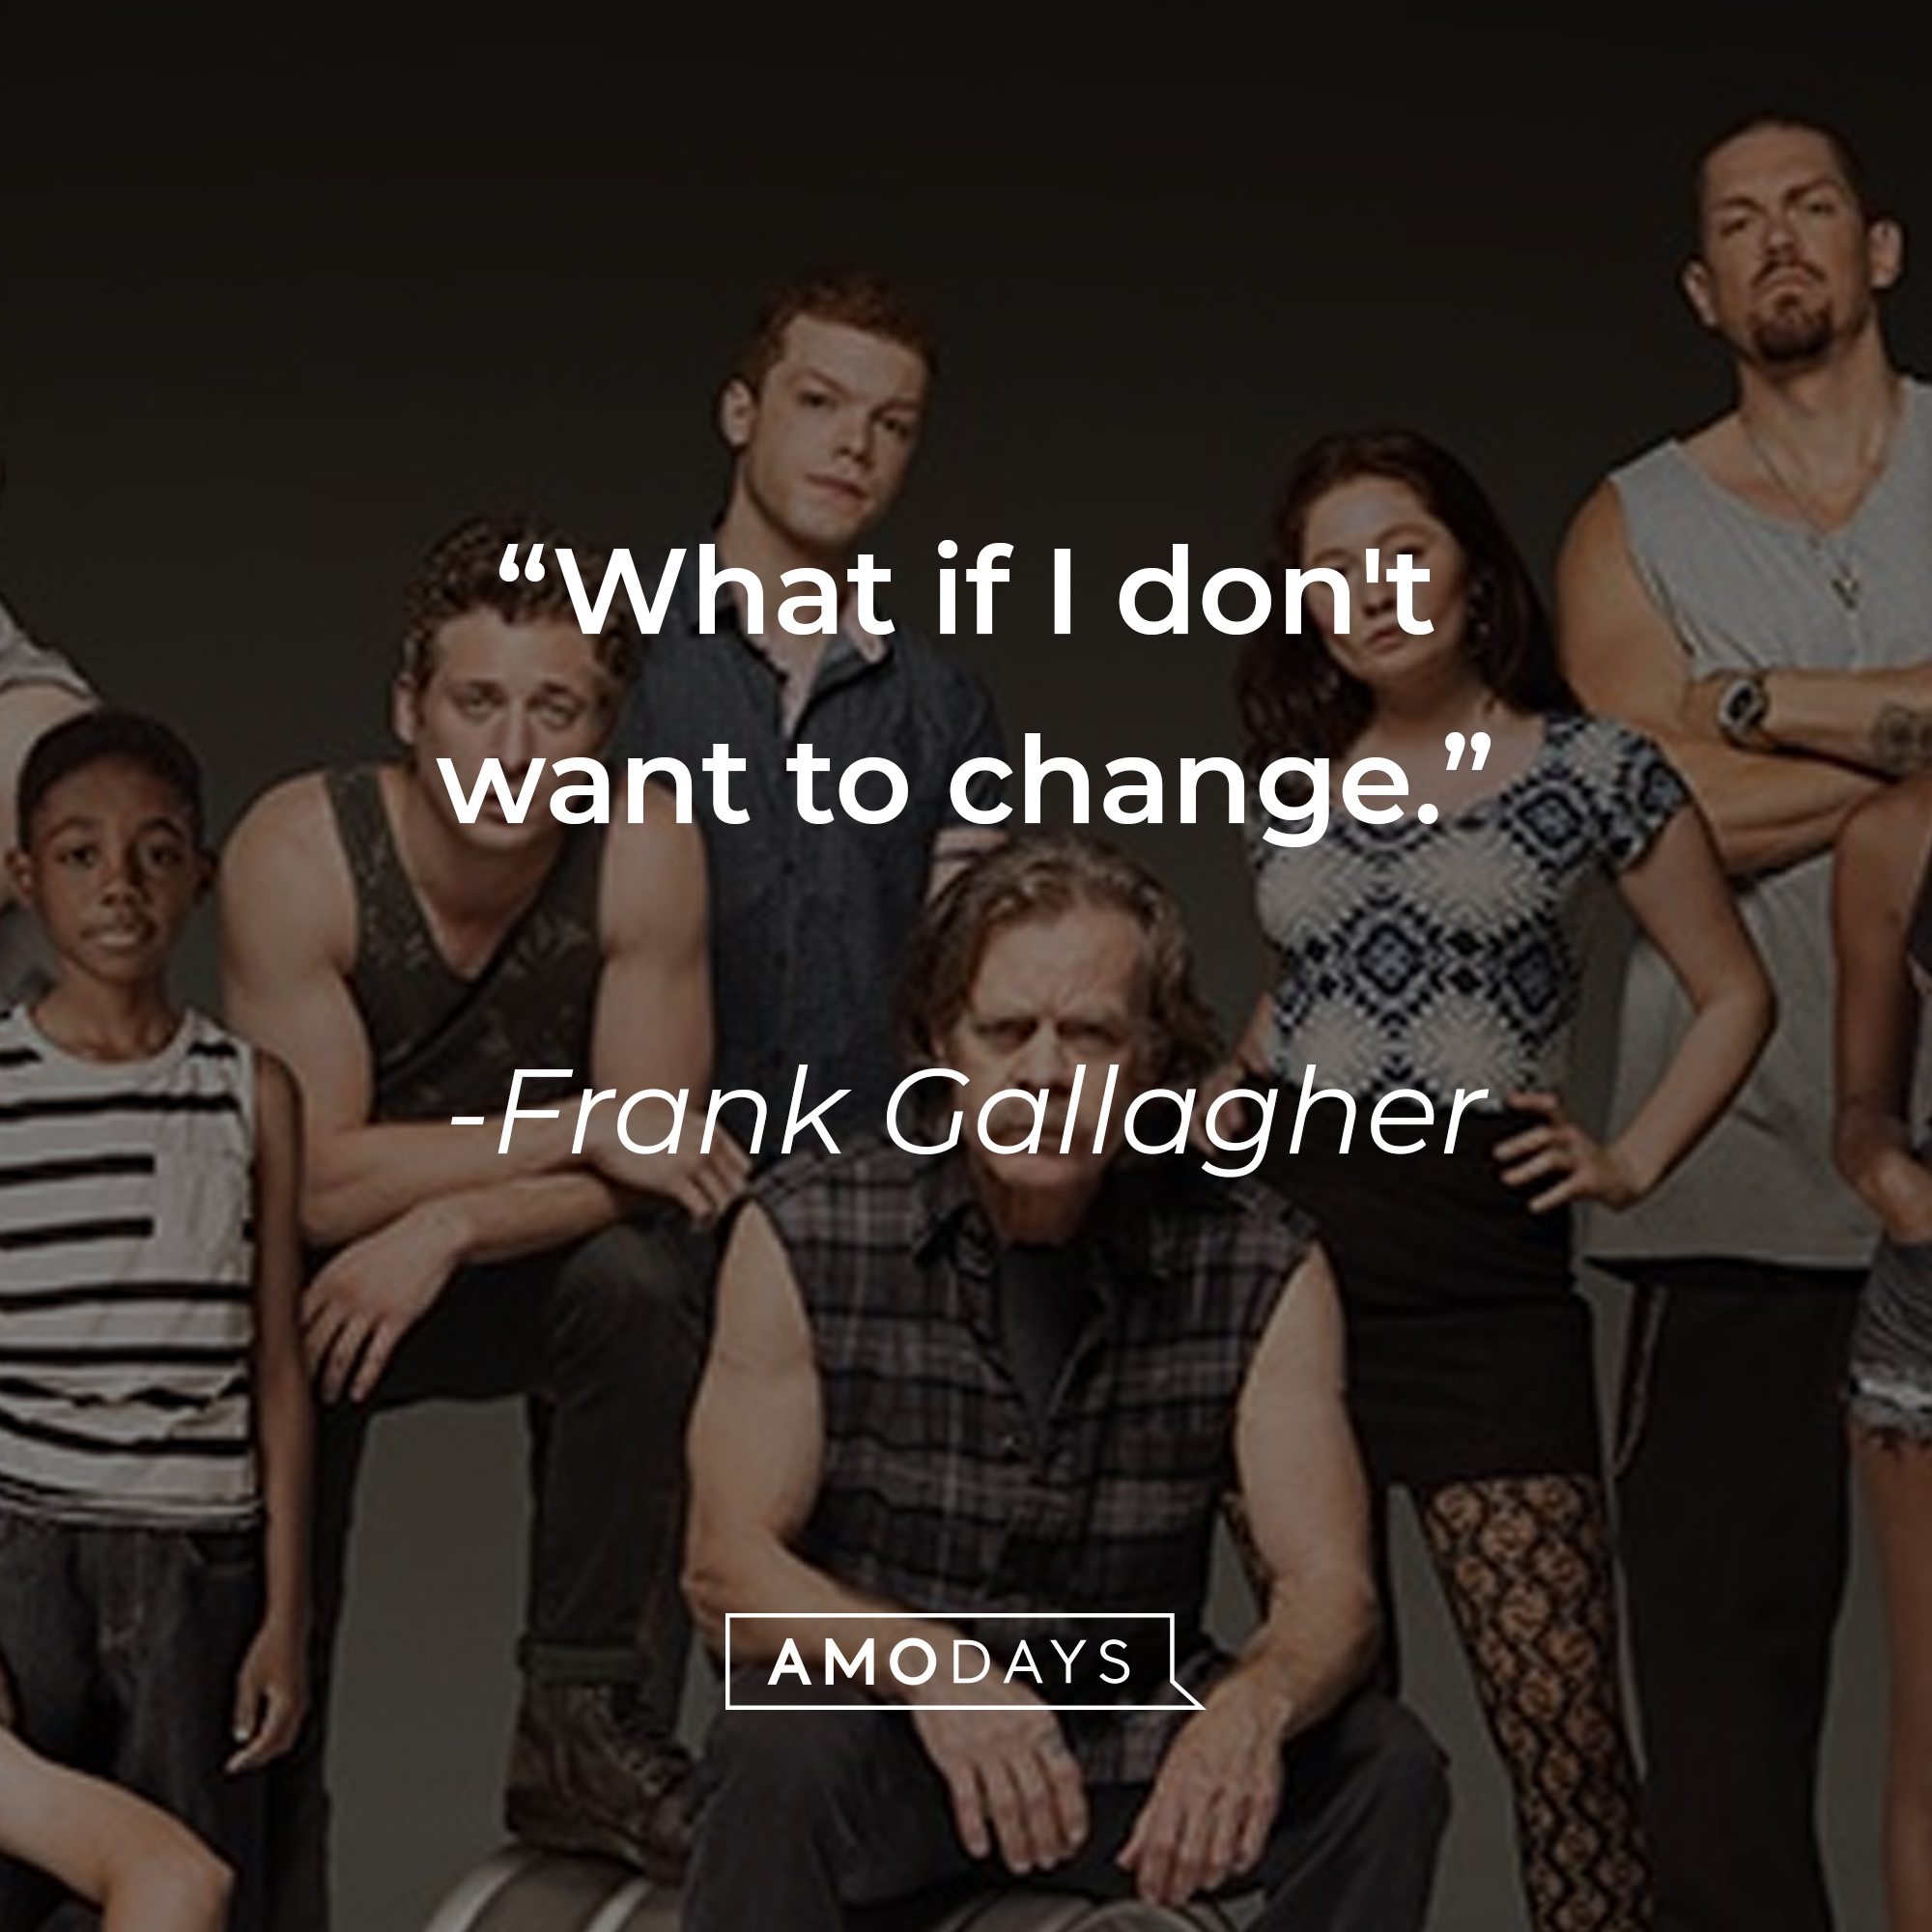 Frank Gallagher's quote: "What if I don't want to change." | Source: facebook.com/ShamelessOnShowtime